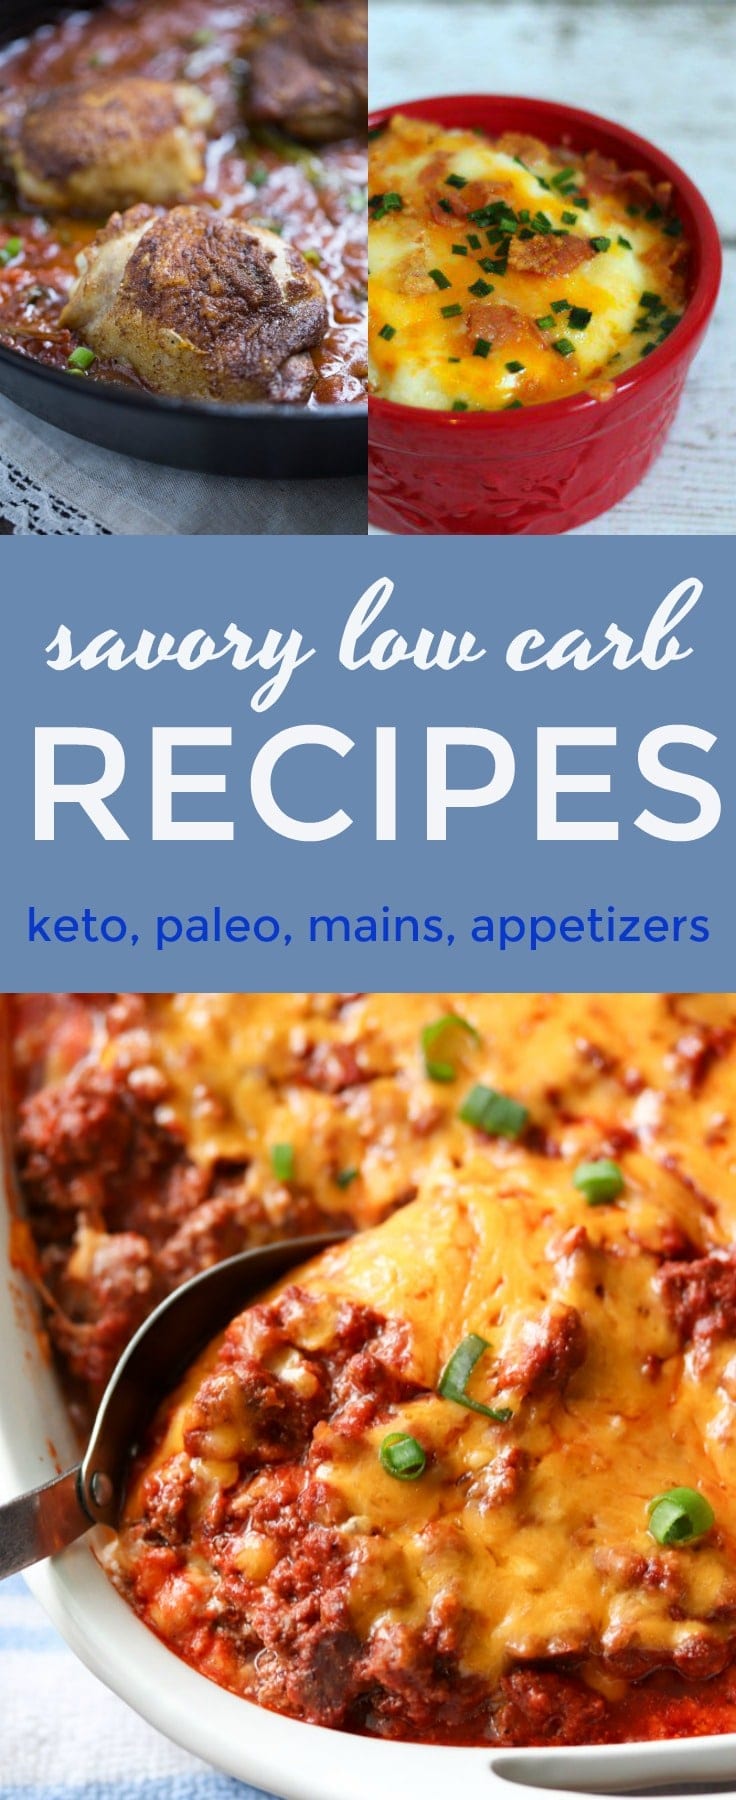 Here’s a collection of savory low carb recipes that I’ve shared on my blog over the years. There’s a ton of variety in this post including meatless recipes, beef, seafood, chicken, appetizers and main dishes. Some are paleo compliant and some are keto compliant.